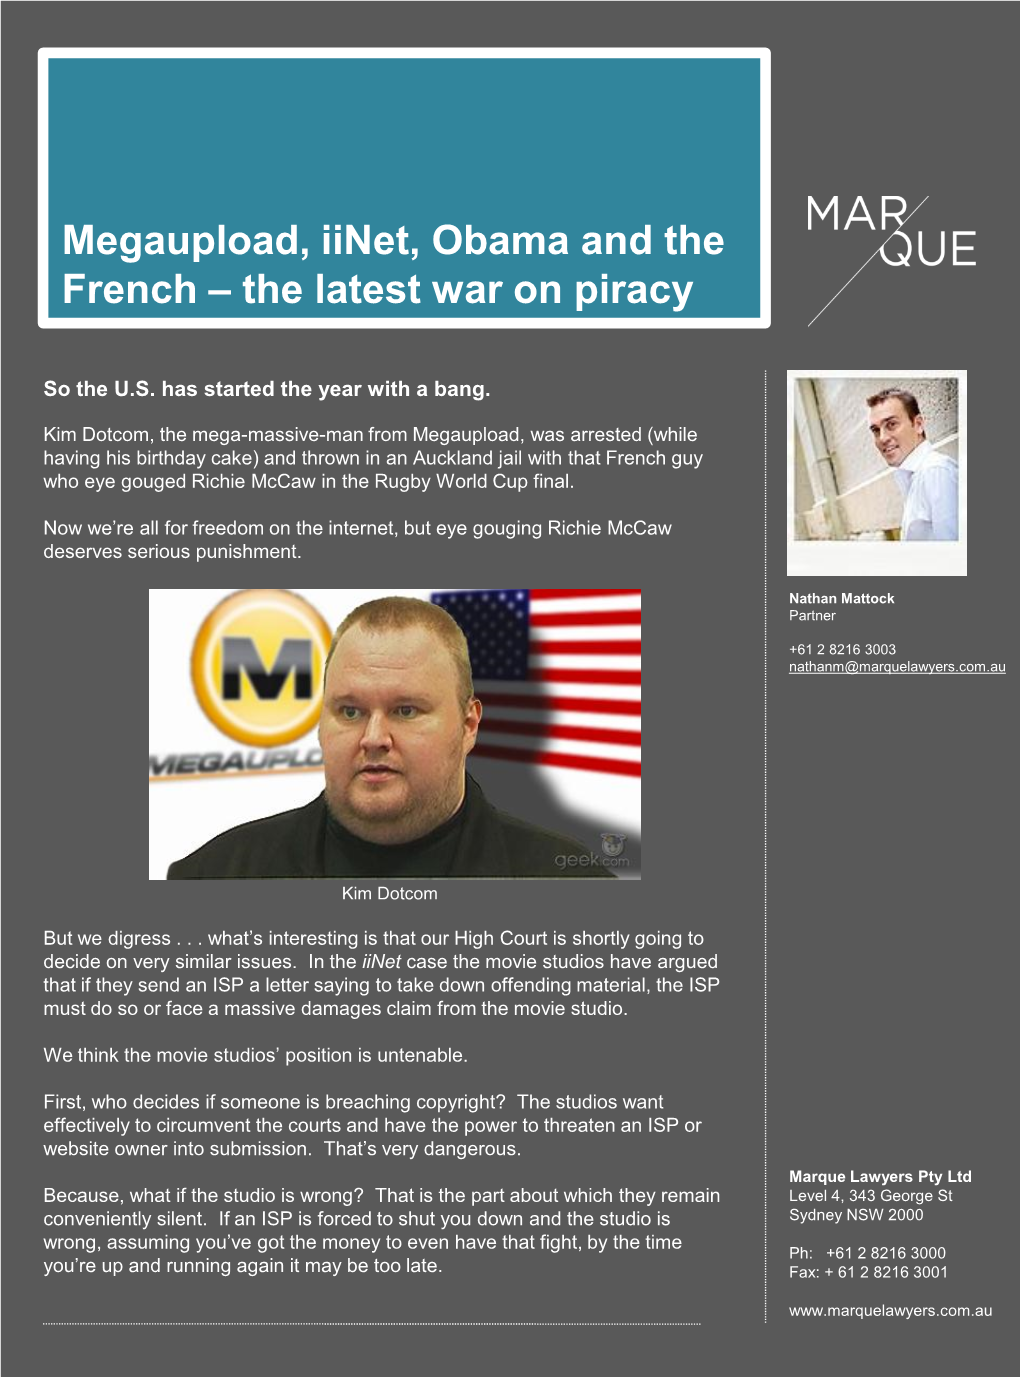 Megaupload, Iinet, Obama and the French – the Latest War on Piracy